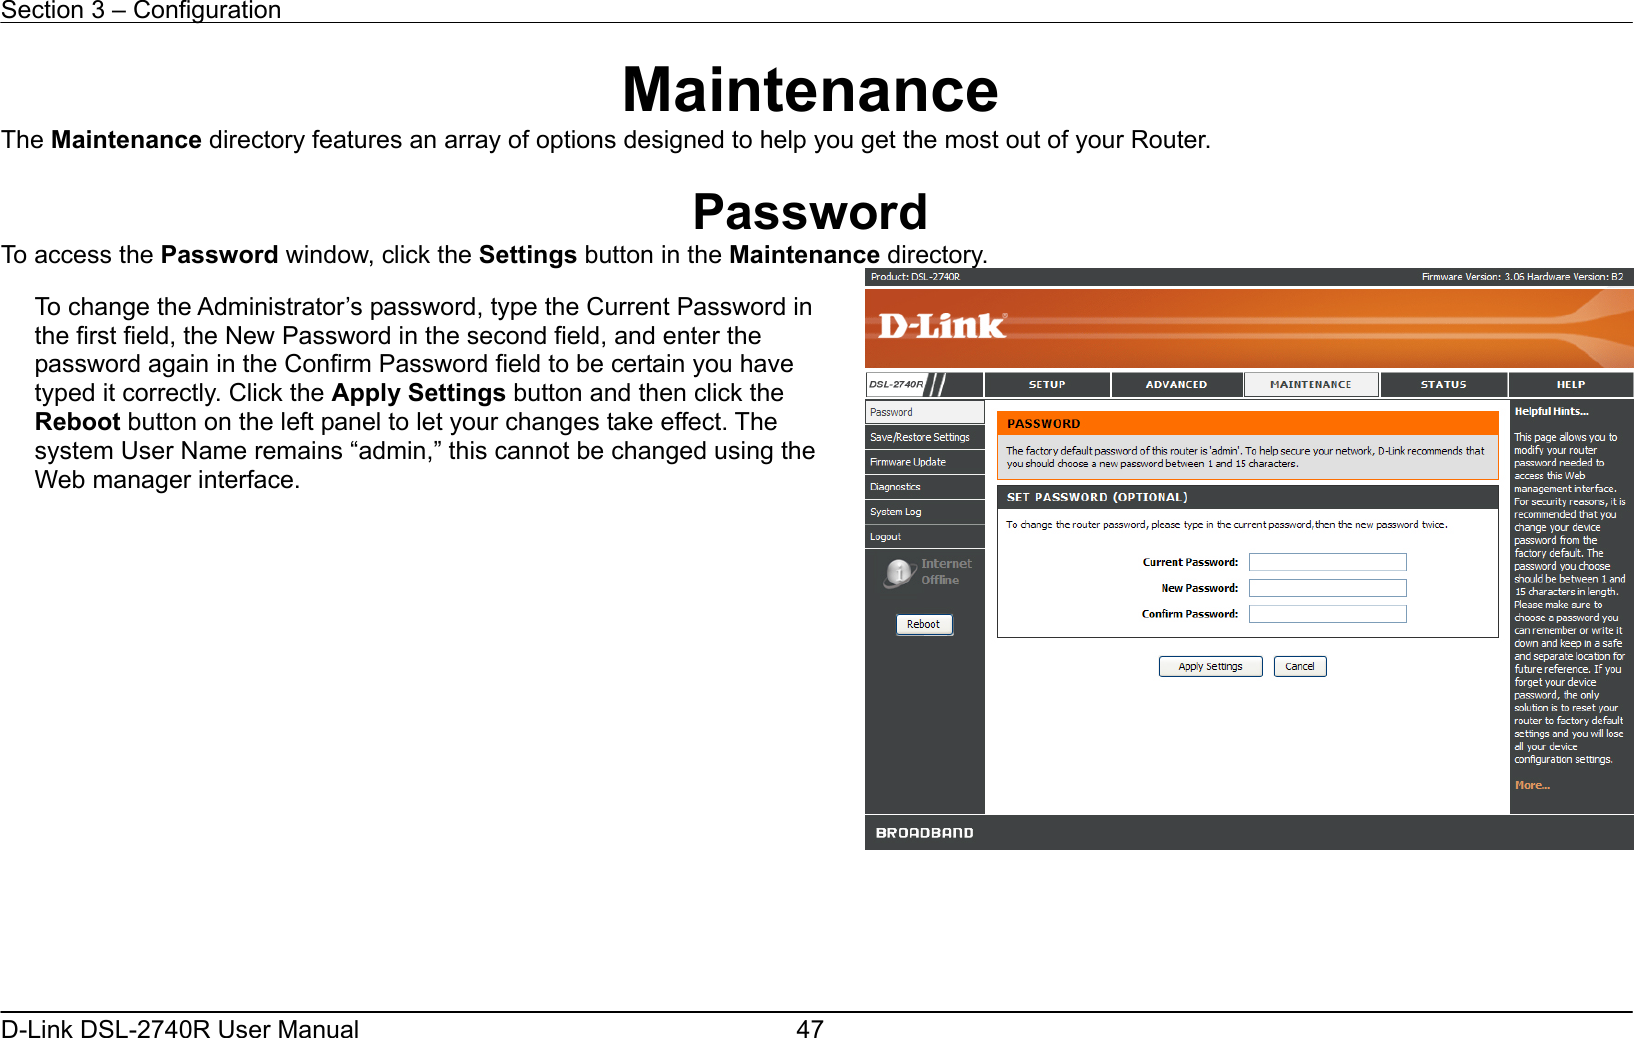 Section 3 – Configuration   D-Link DSL-2740R User Manual  47Maintenance The Maintenance directory features an array of options designed to help you get the most out of your Router.  Password To access the Password window, click the Settings button in the Maintenance directory.      To change the Administrator’s password, type the Current Password in the first field, the New Password in the second field, and enter the password again in the Confirm Password field to be certain you have typed it correctly. Click the Apply Settings button and then click the Reboot button on the left panel to let your changes take effect. The system User Name remains “admin,” this cannot be changed using the Web manager interface. 